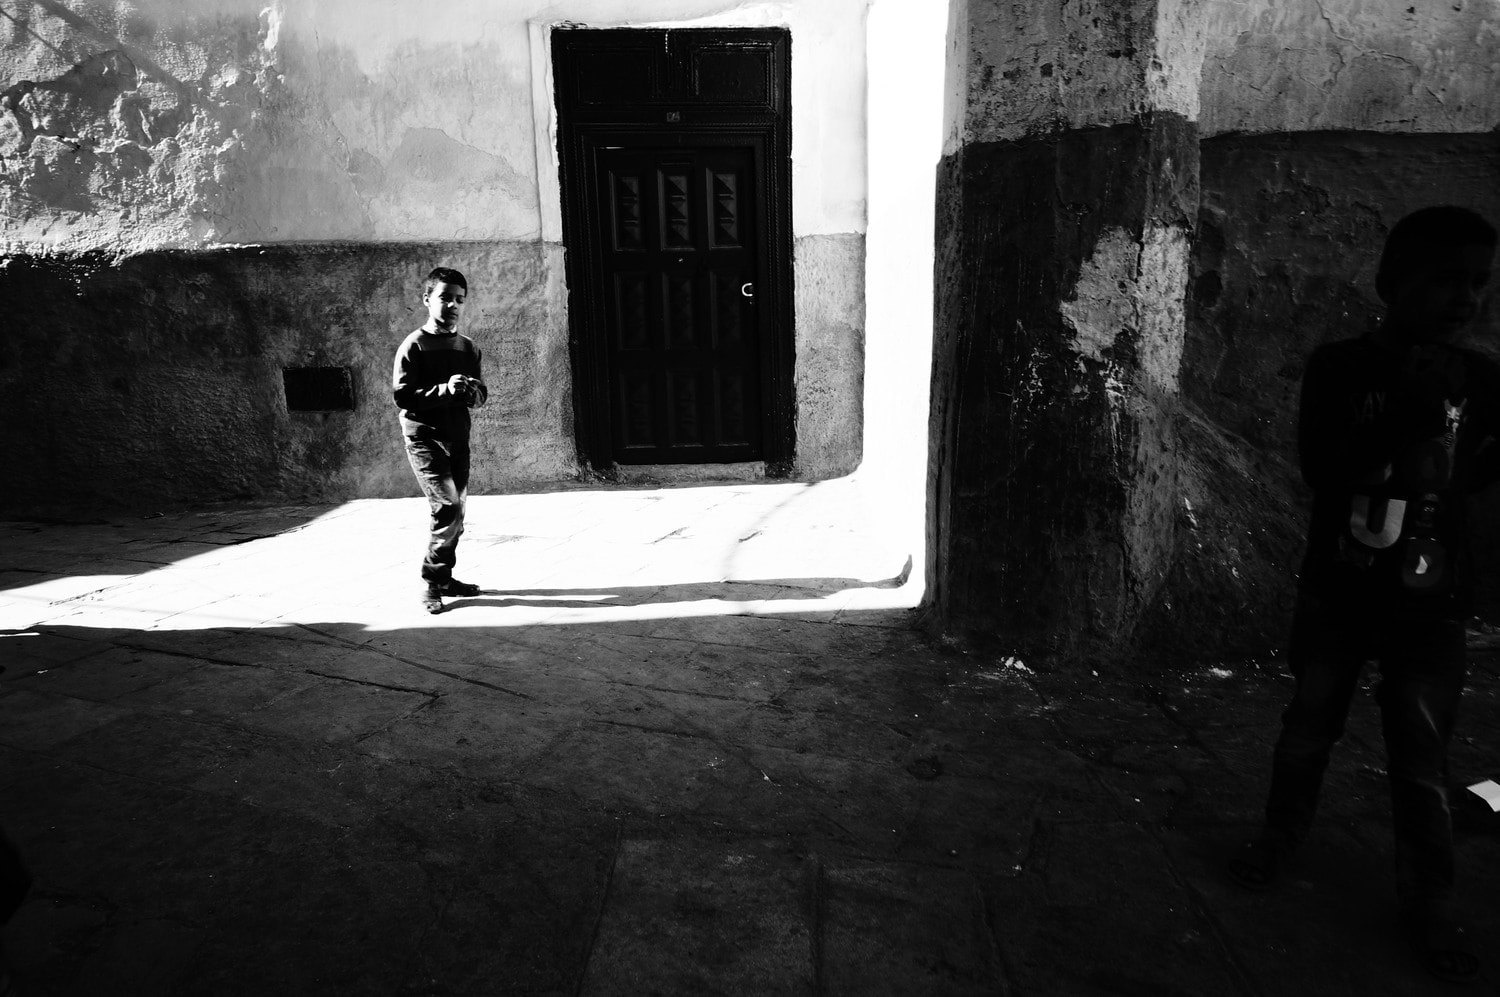 Fez, wolrd's children, street photography, black and white, art, people, colors